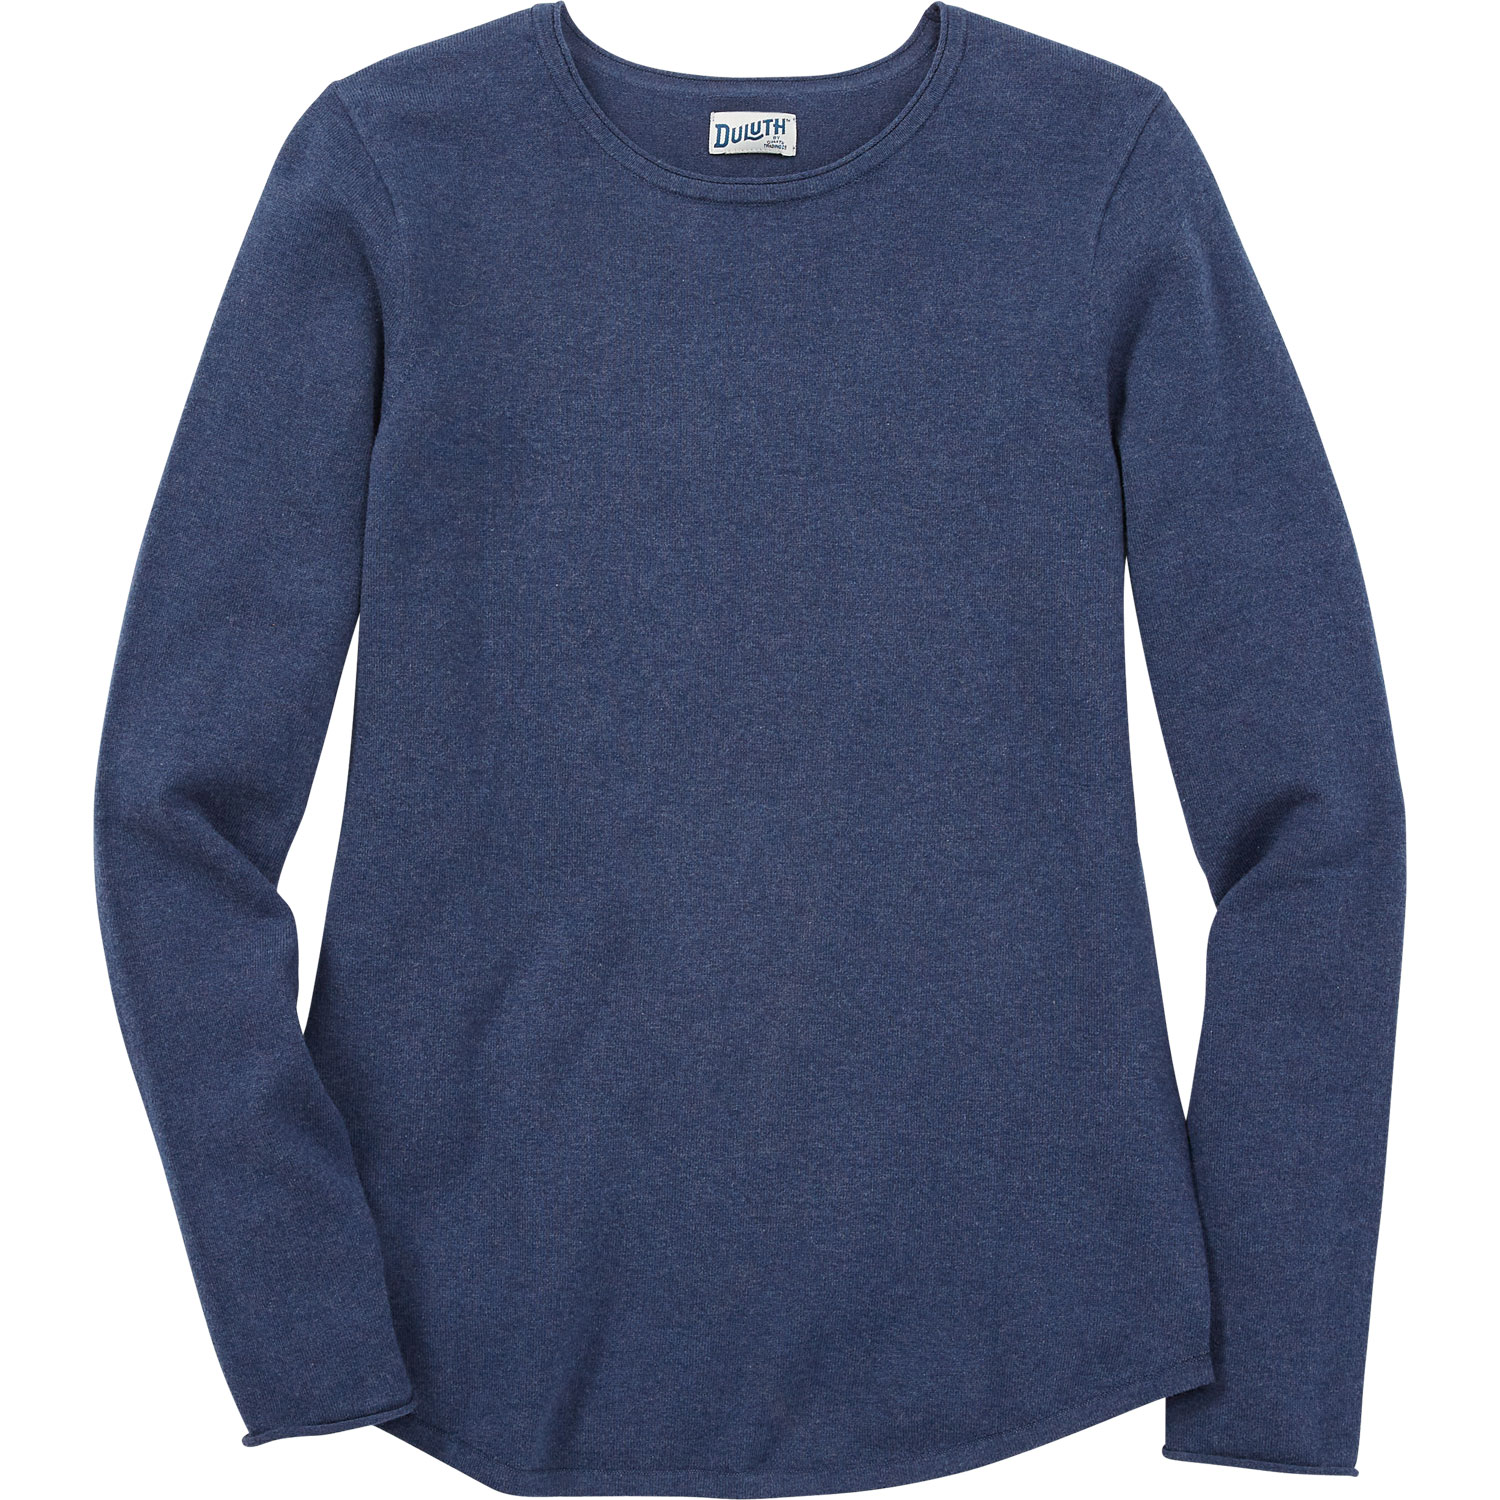 Women's Shiftless Crewneck Sweater | Duluth Trading Company